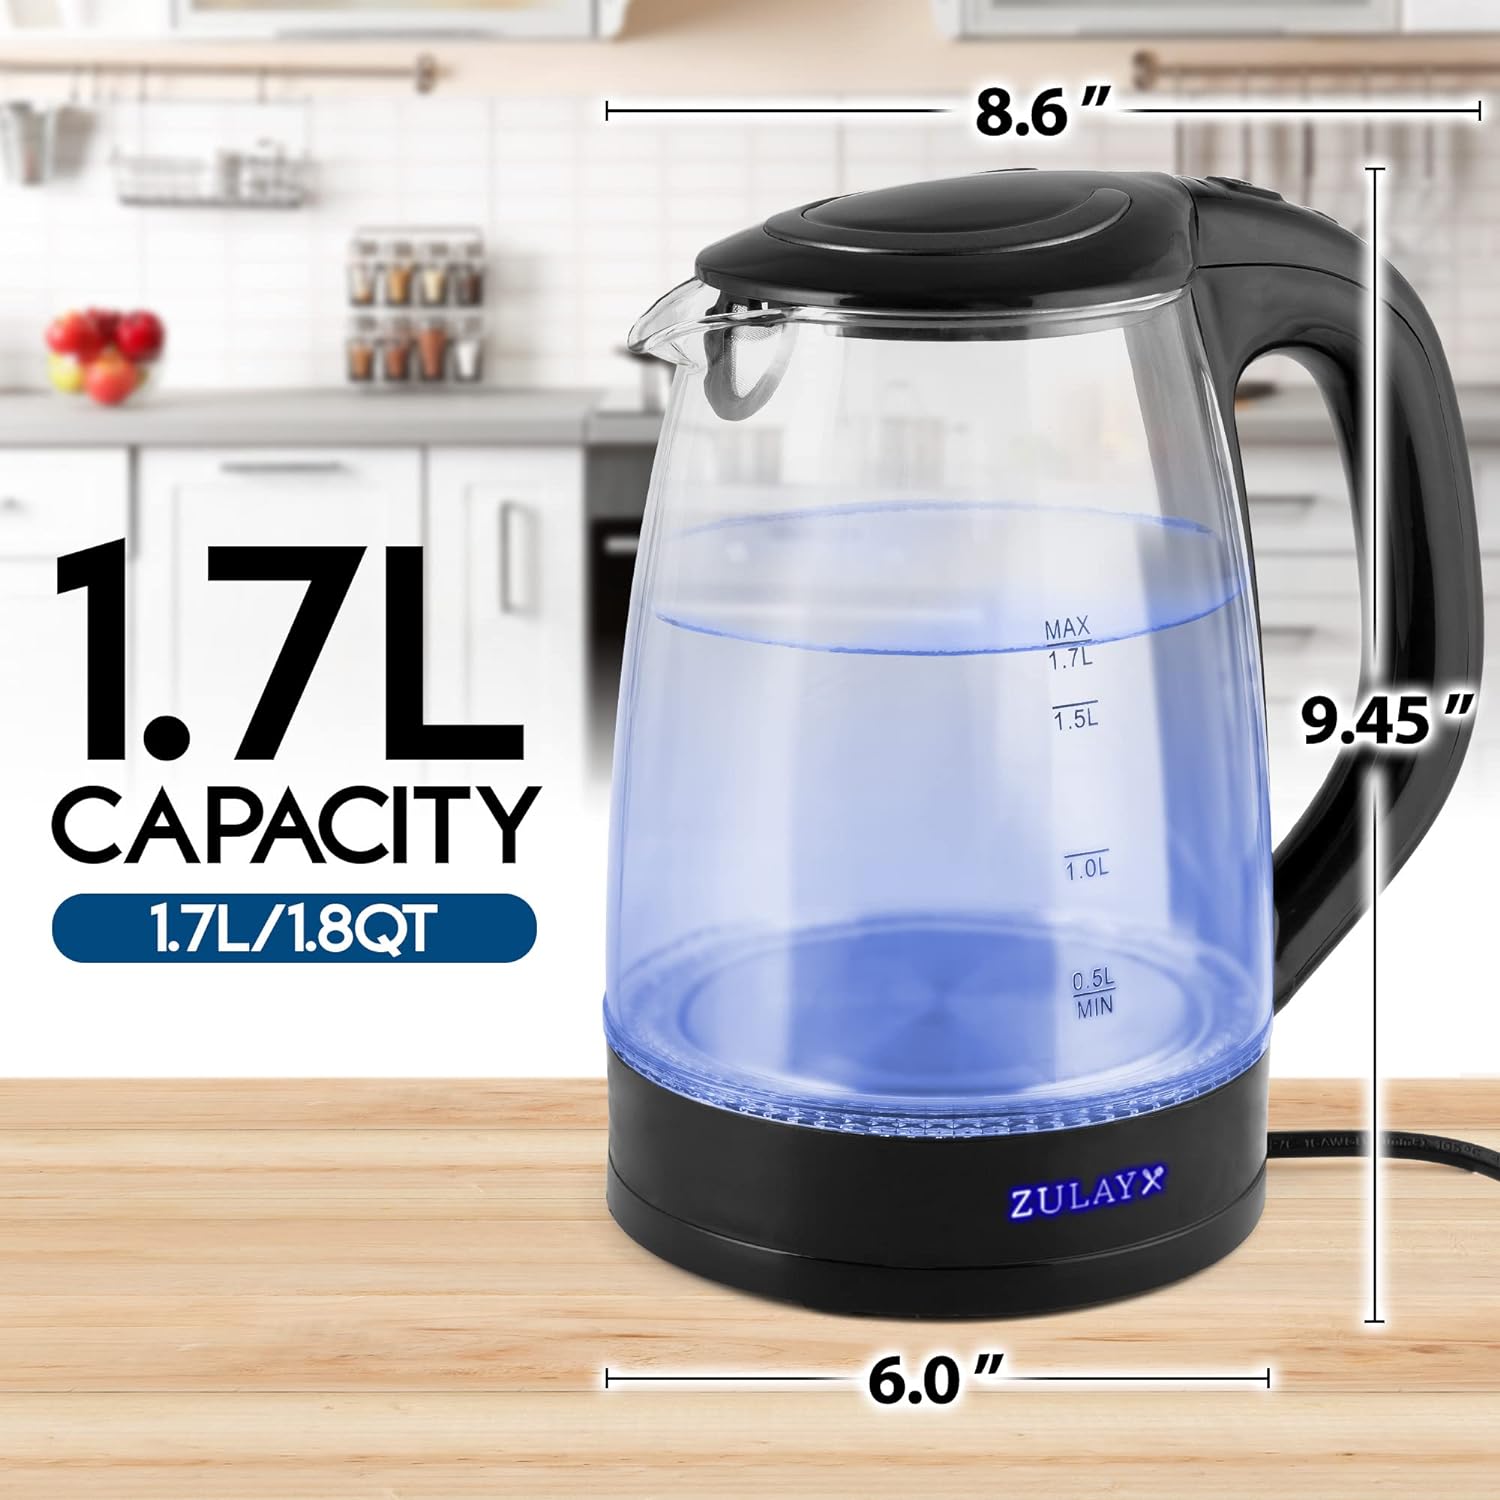 Zulay 1.7L Glass Electric Kettle with Blue LED Light